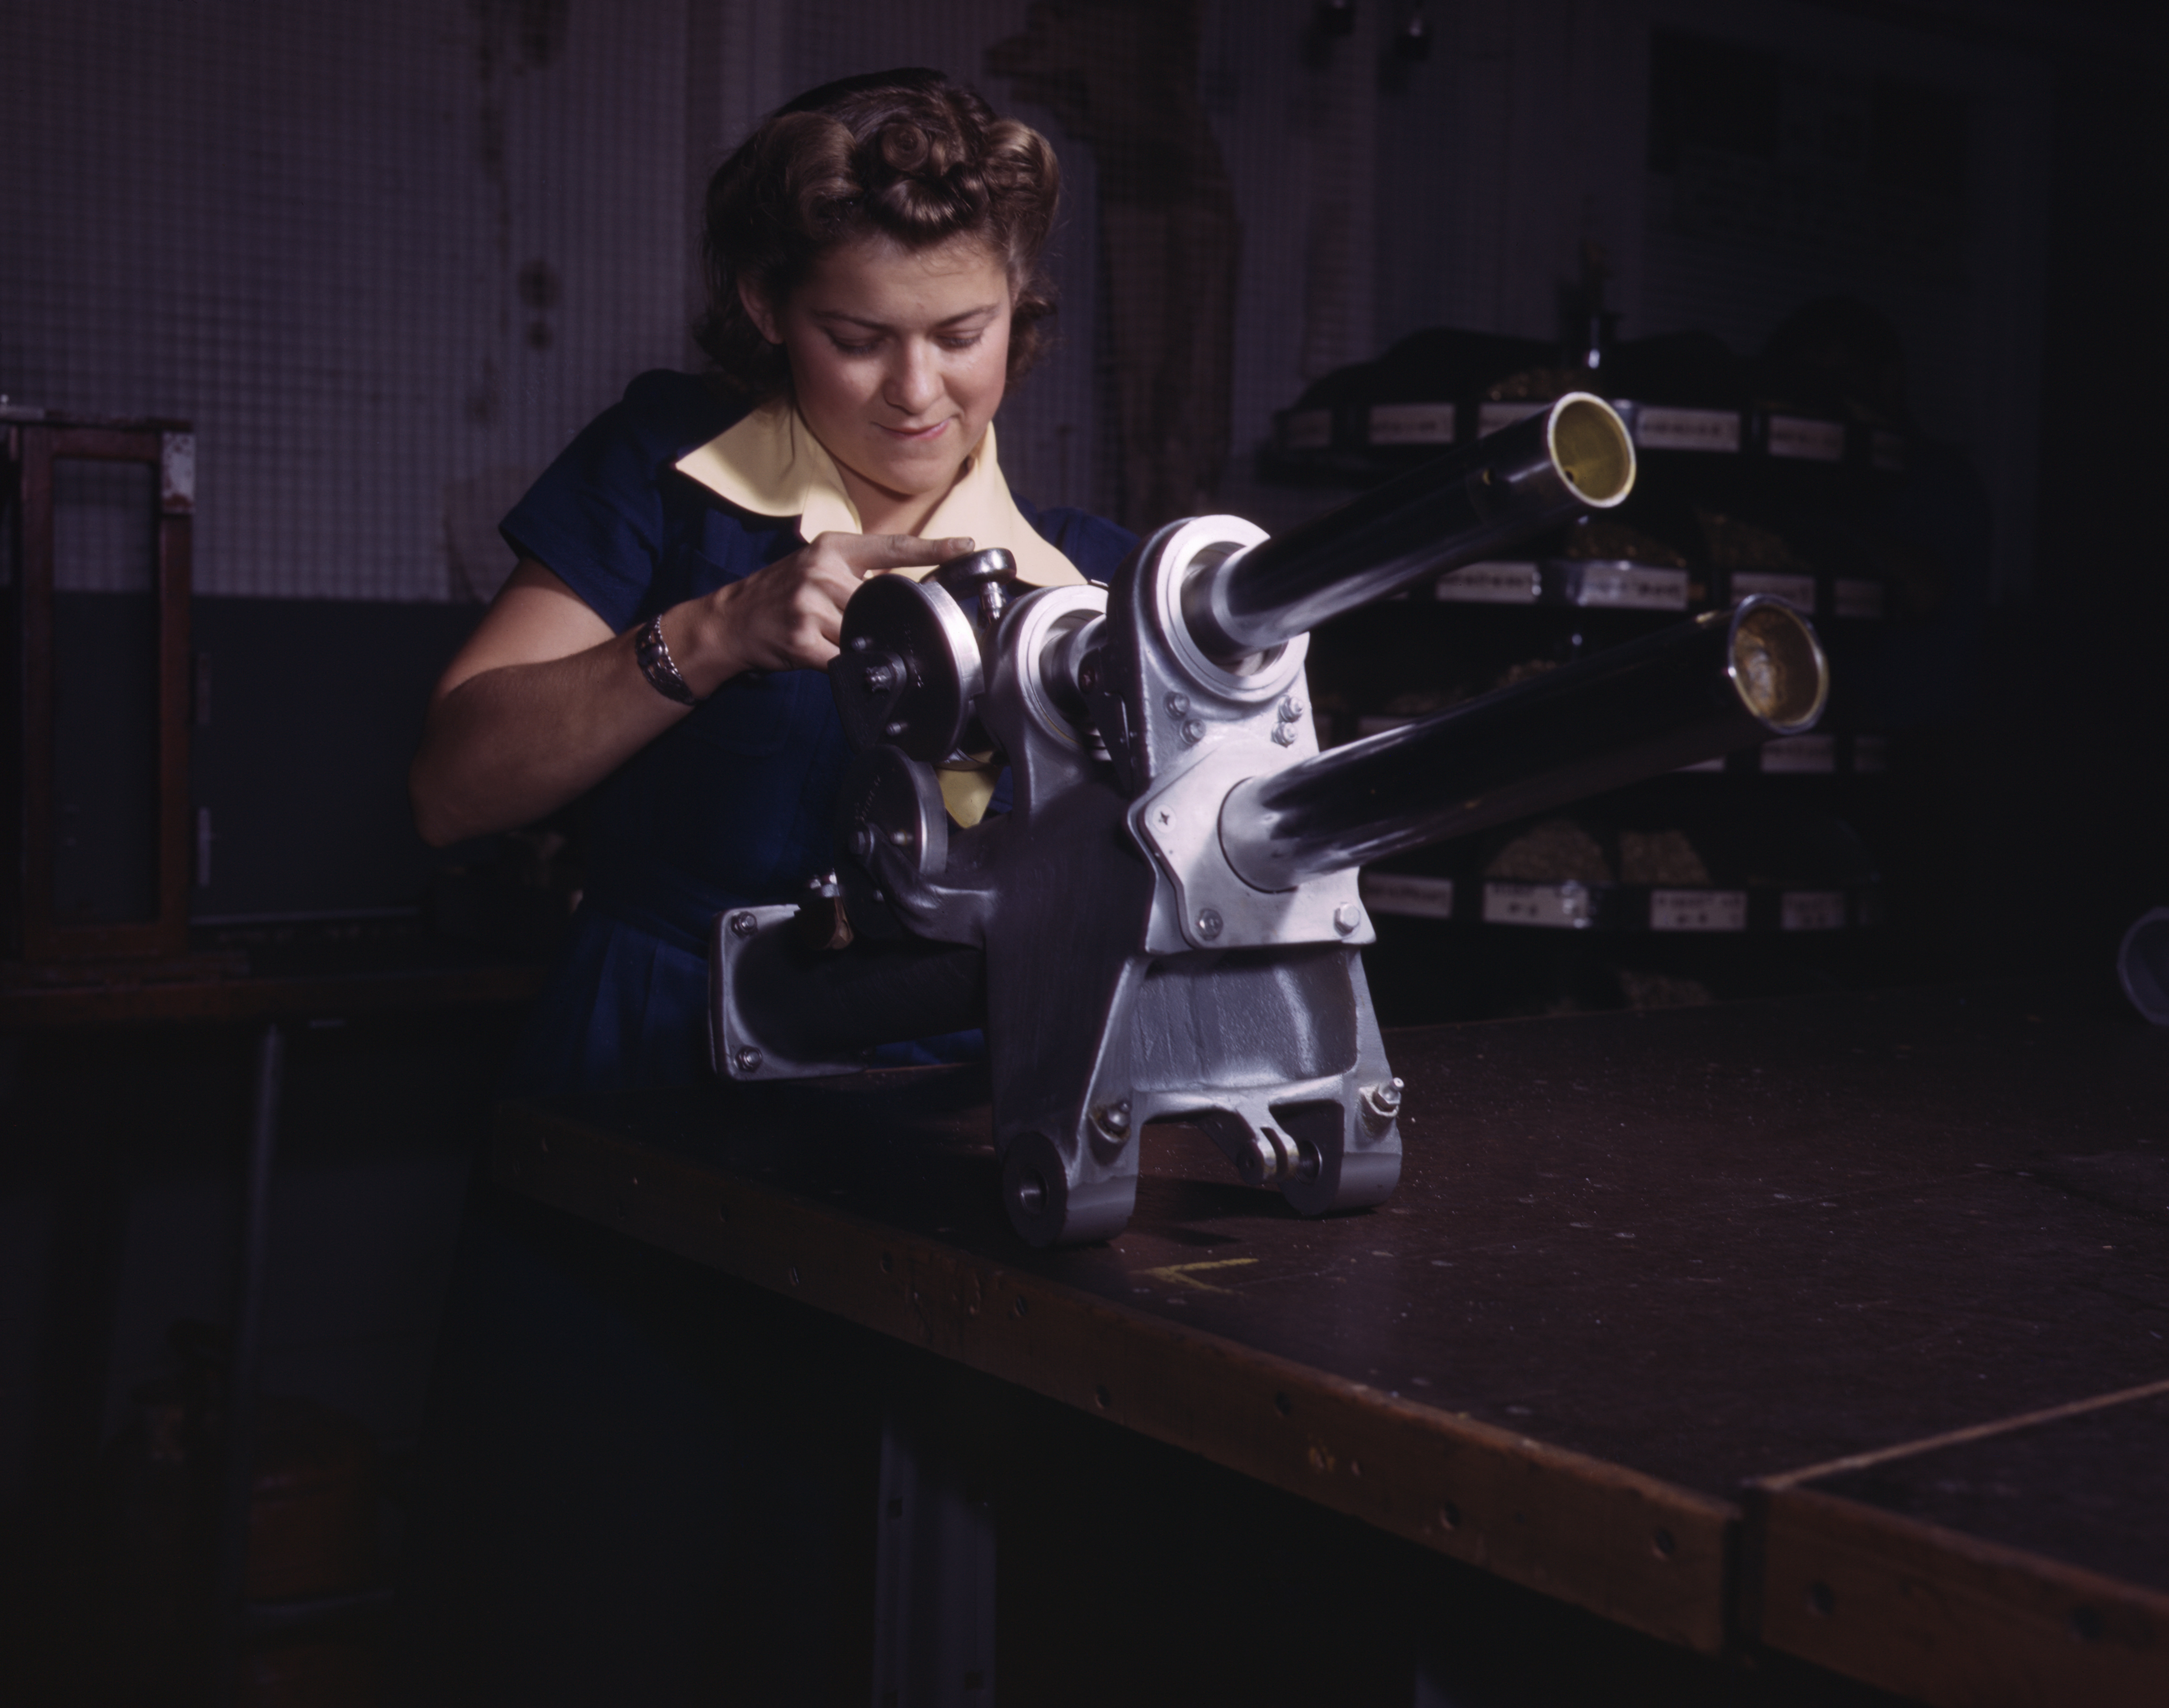 An American woman working on the landing gear of a P-51 Mustang aircraft at the North American Aviation plant, Inglewood, California, United States, Oct 1942